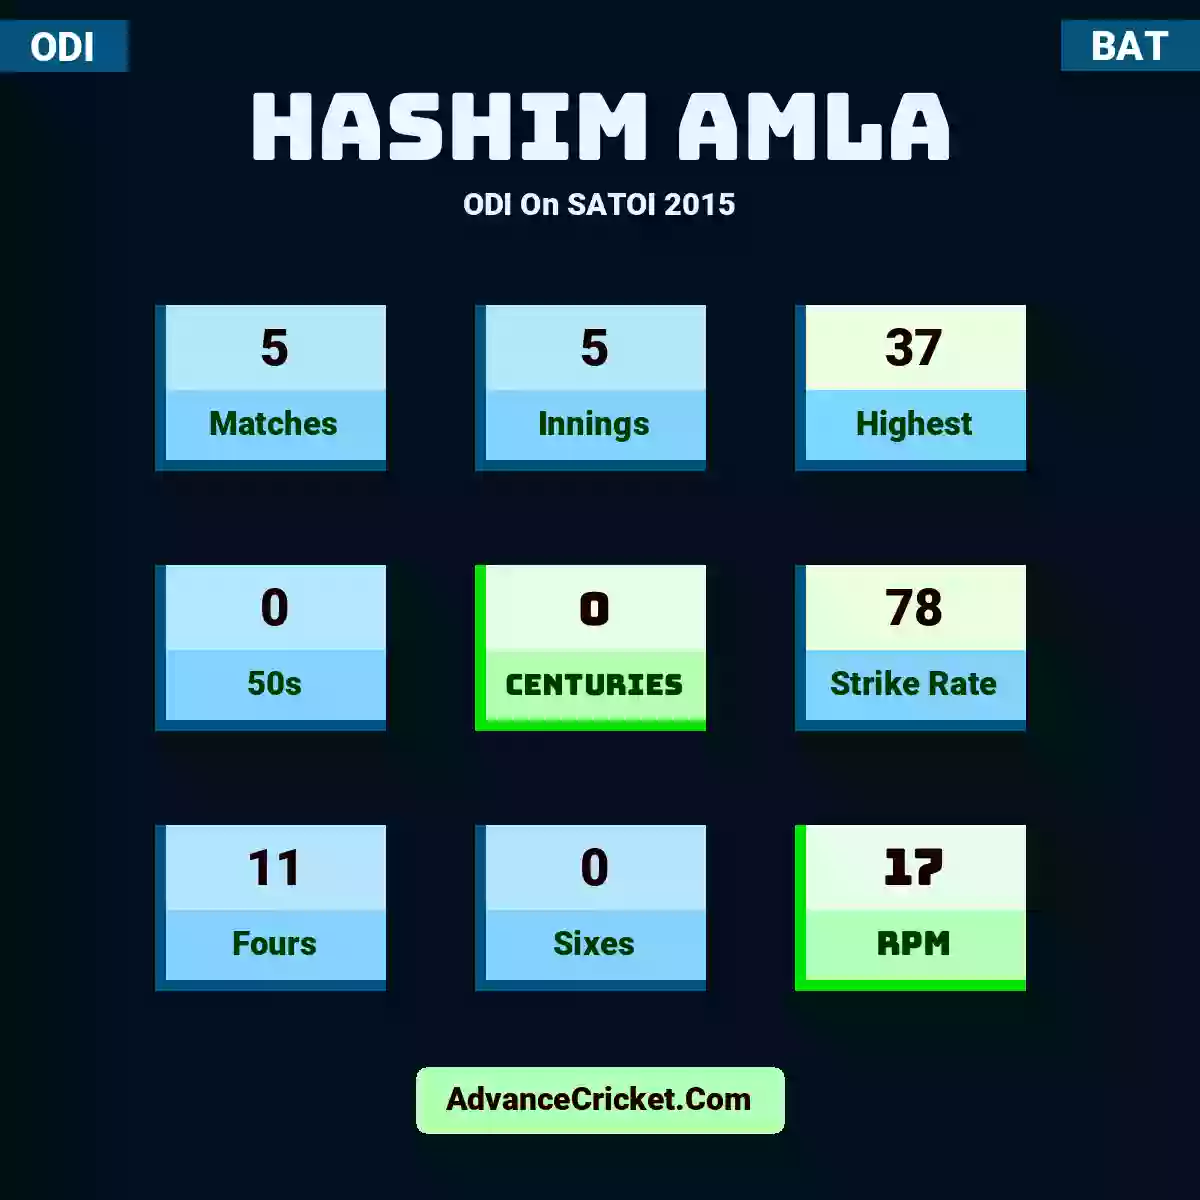 Hashim Amla ODI  On SATOI 2015, Hashim Amla played 5 matches, scored 37 runs as highest, 0 half-centuries, and 0 centuries, with a strike rate of 78. H.Amla hit 11 fours and 0 sixes, with an RPM of 17.